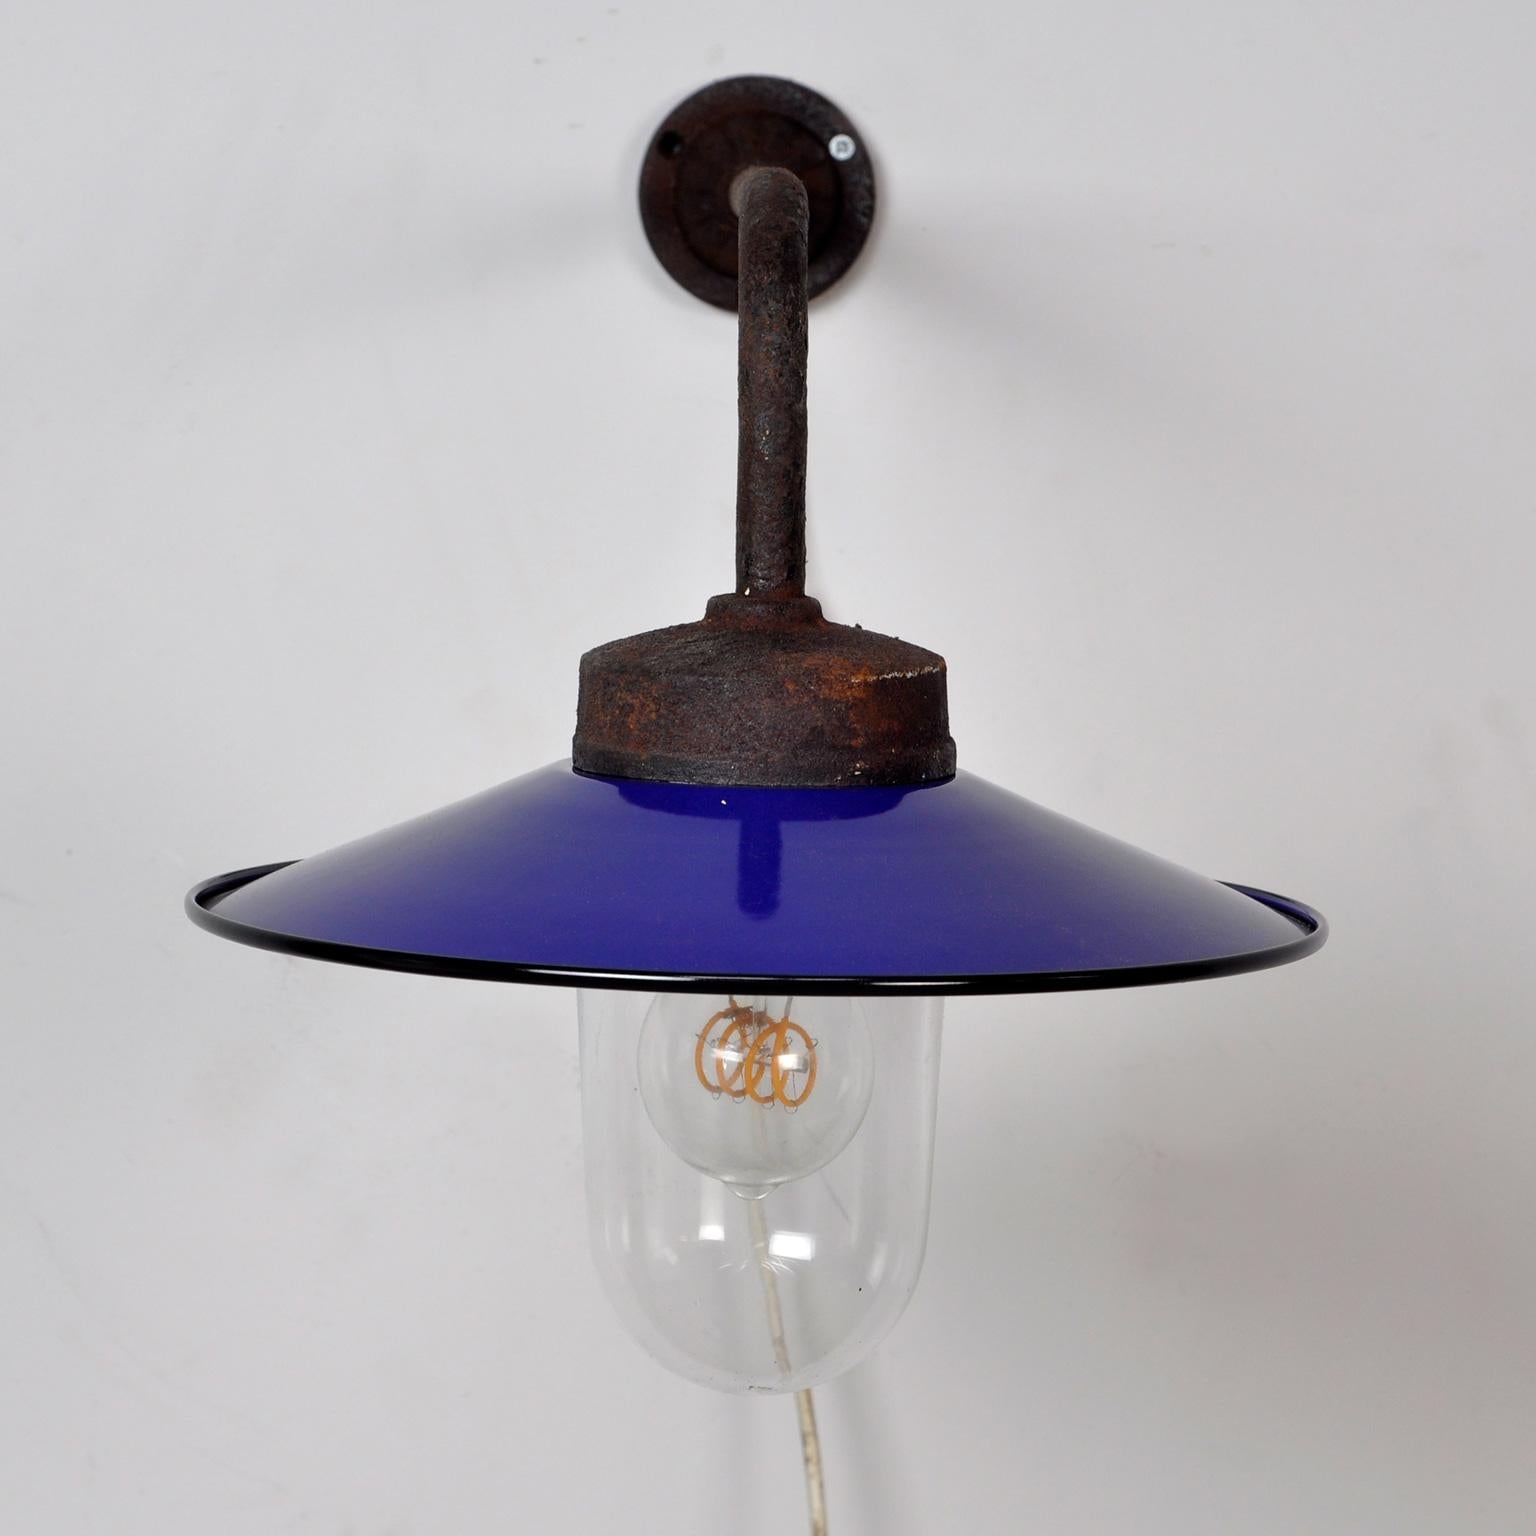 The lamp has a thick iron arm with cast iron beginning and end. The enamel blue shade is white at the inside for as much light as possible.
To be mounted on the wall.
